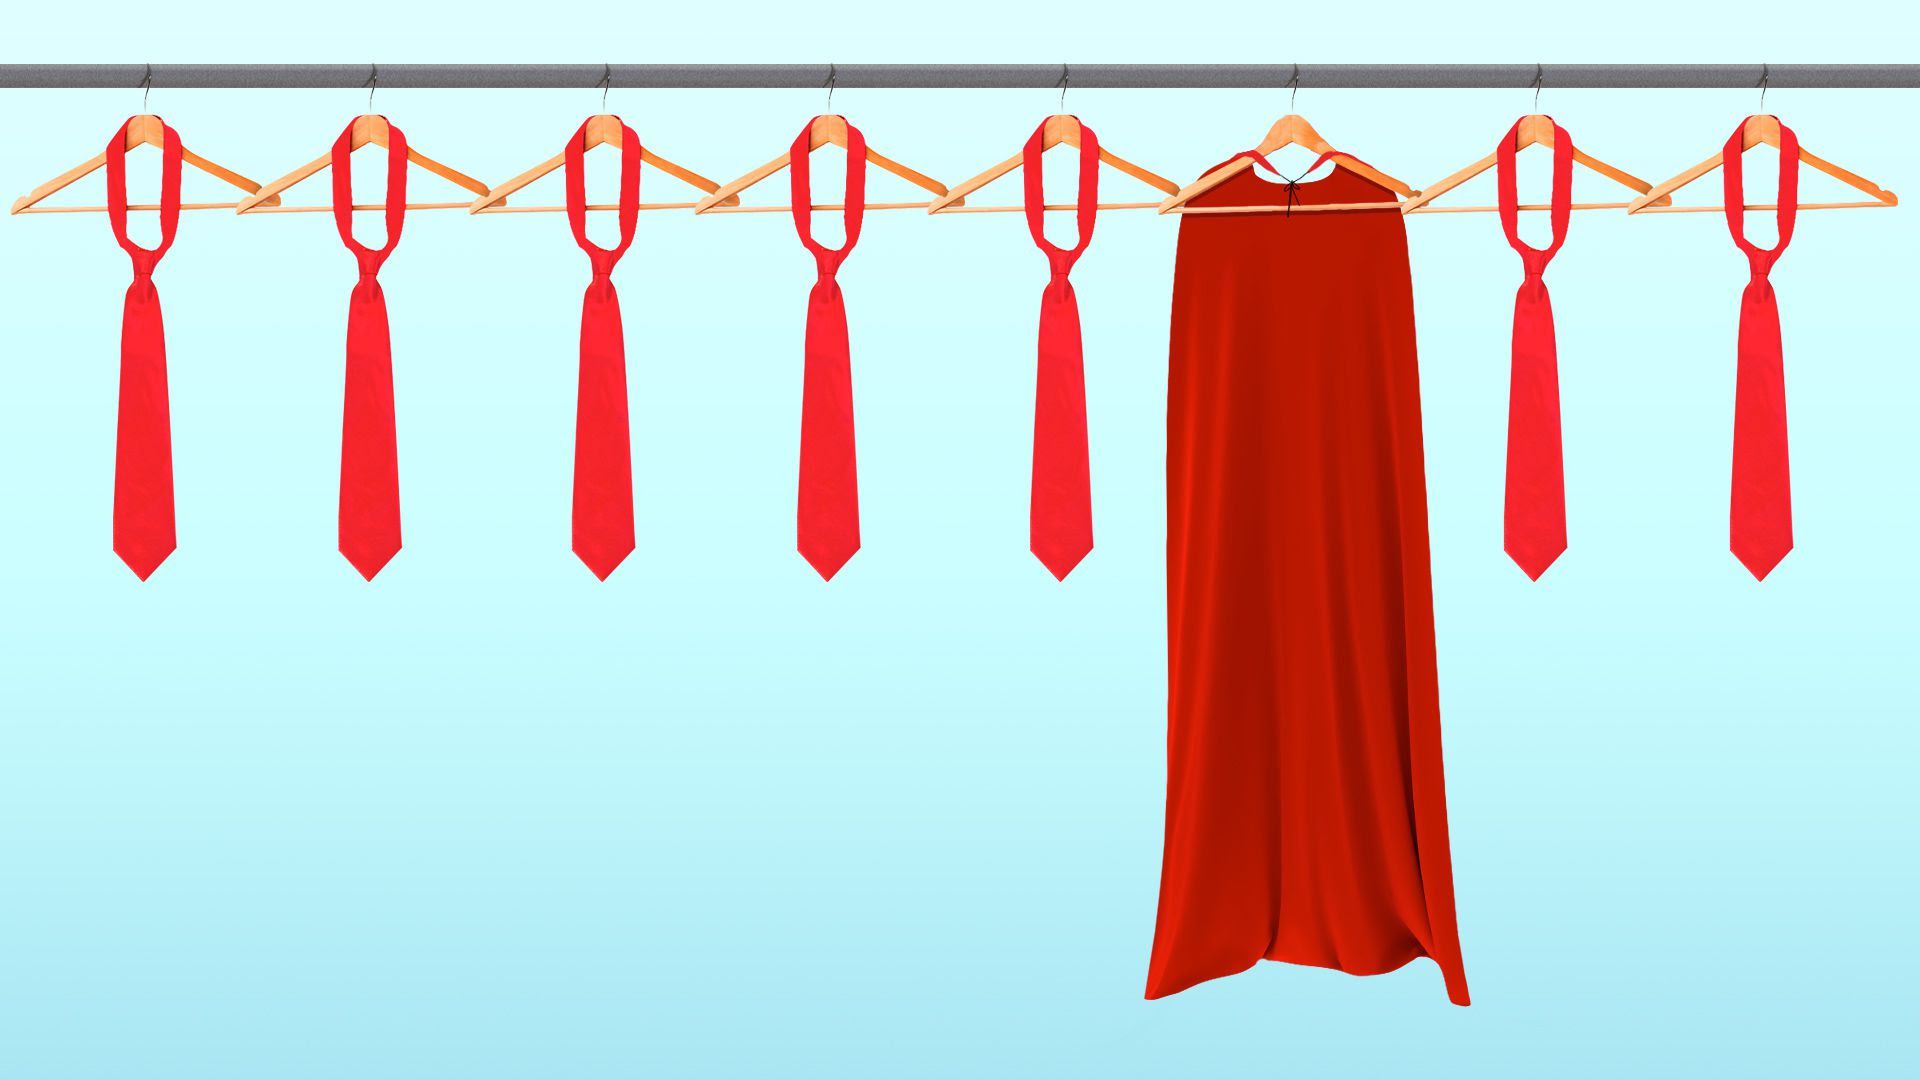 An illustration of a cape hanging among a row of ties